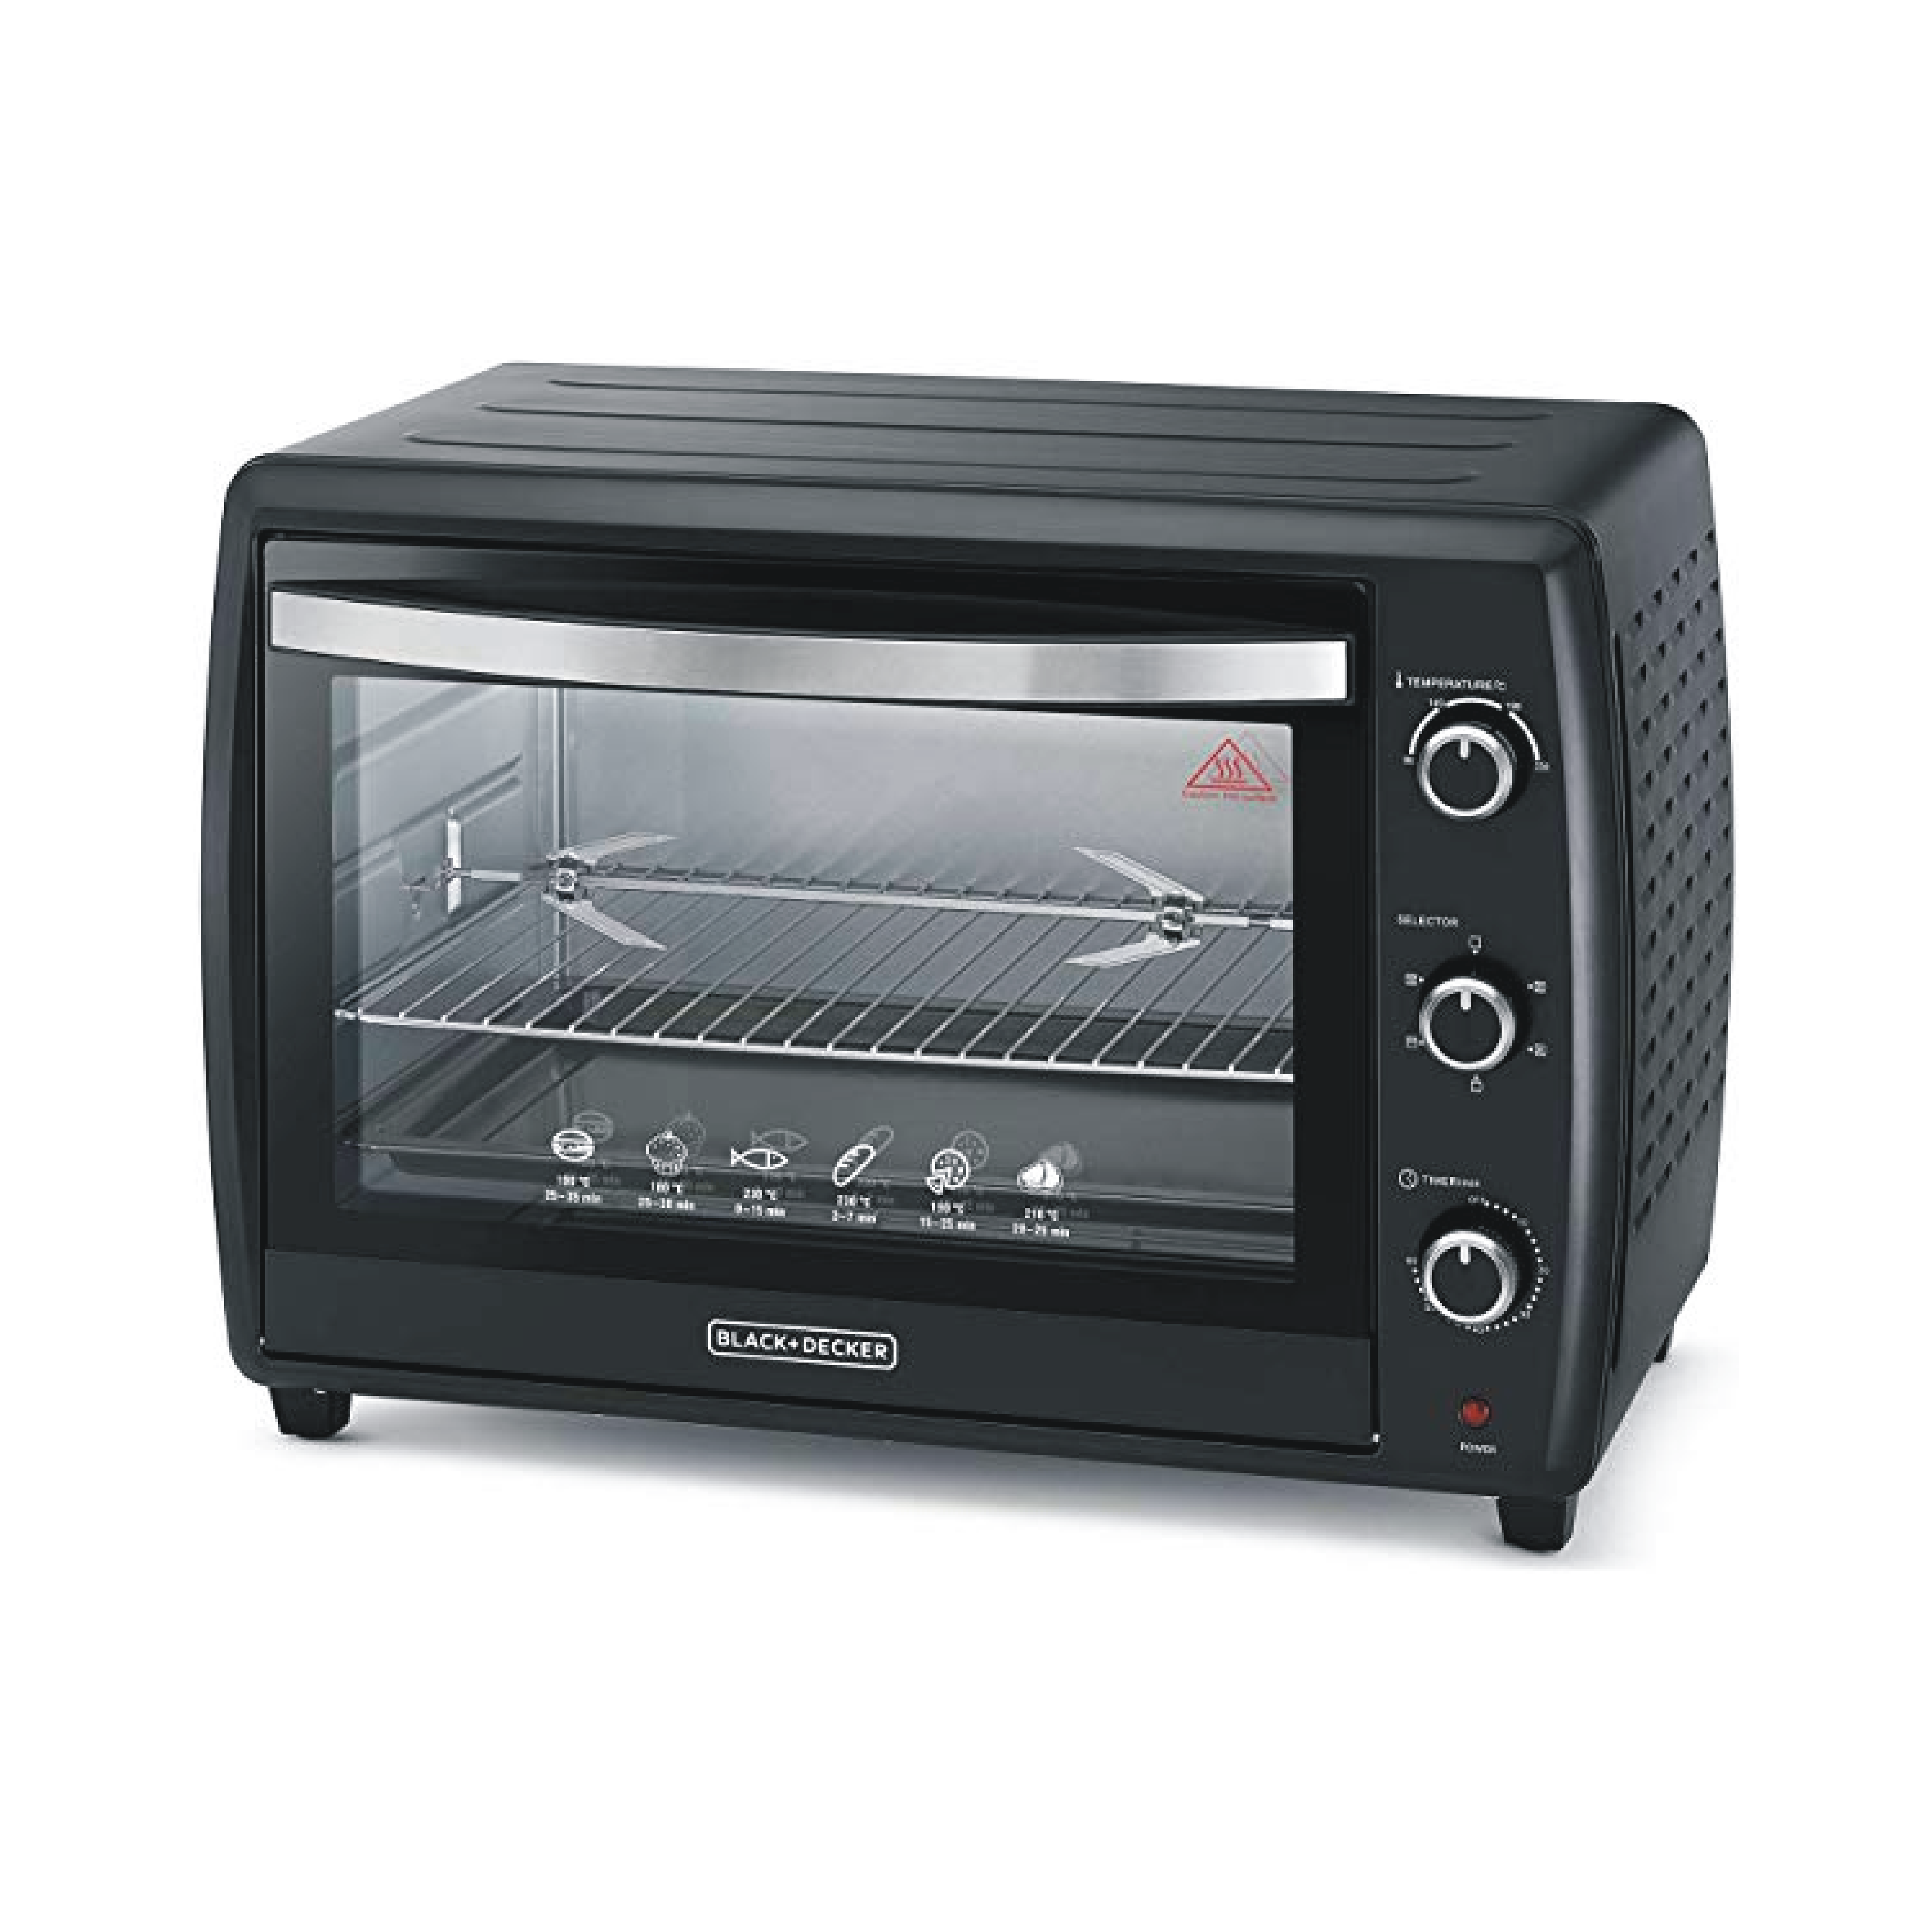 TRO70 - Oven+Toaster+Grill - 70L (Double-Glazed)